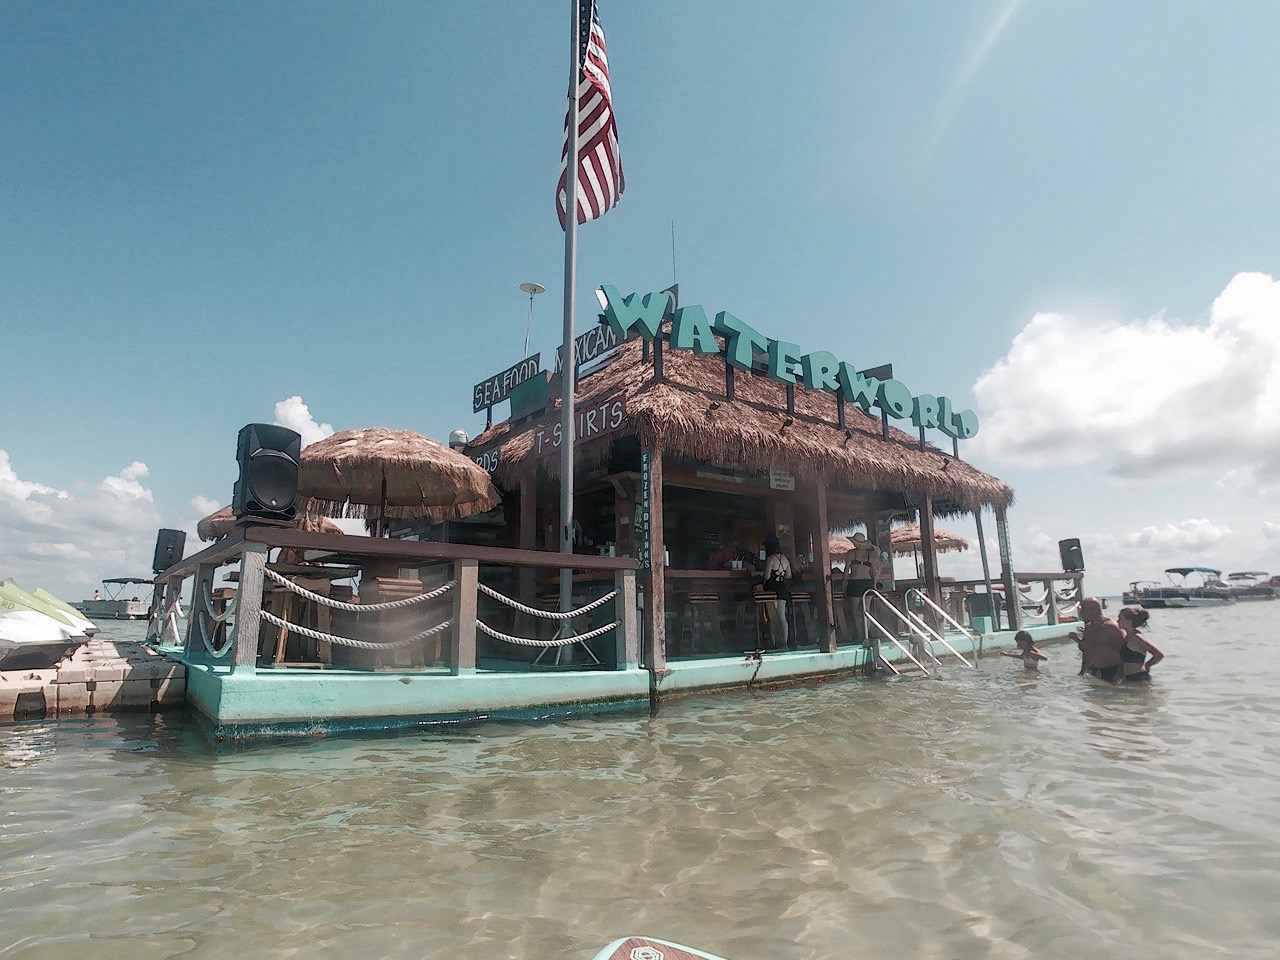 A floating bar that reads "Waterworld"